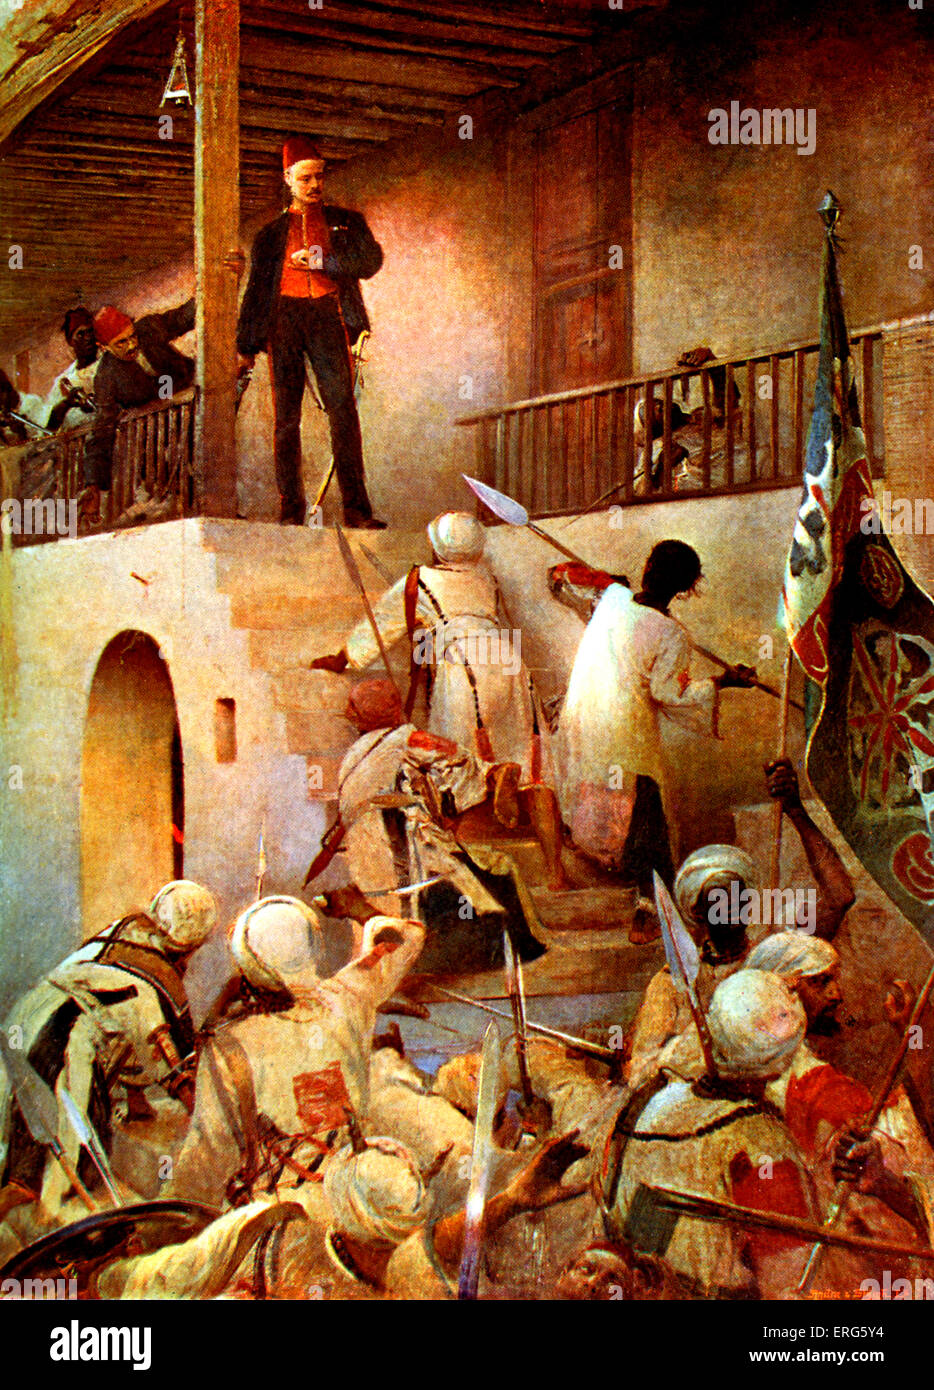 General Gordon's Last Stand, after painting by George W. Joy, 1885. Gordon about to be attacked by warriors of the Mahdi in Stock Photo